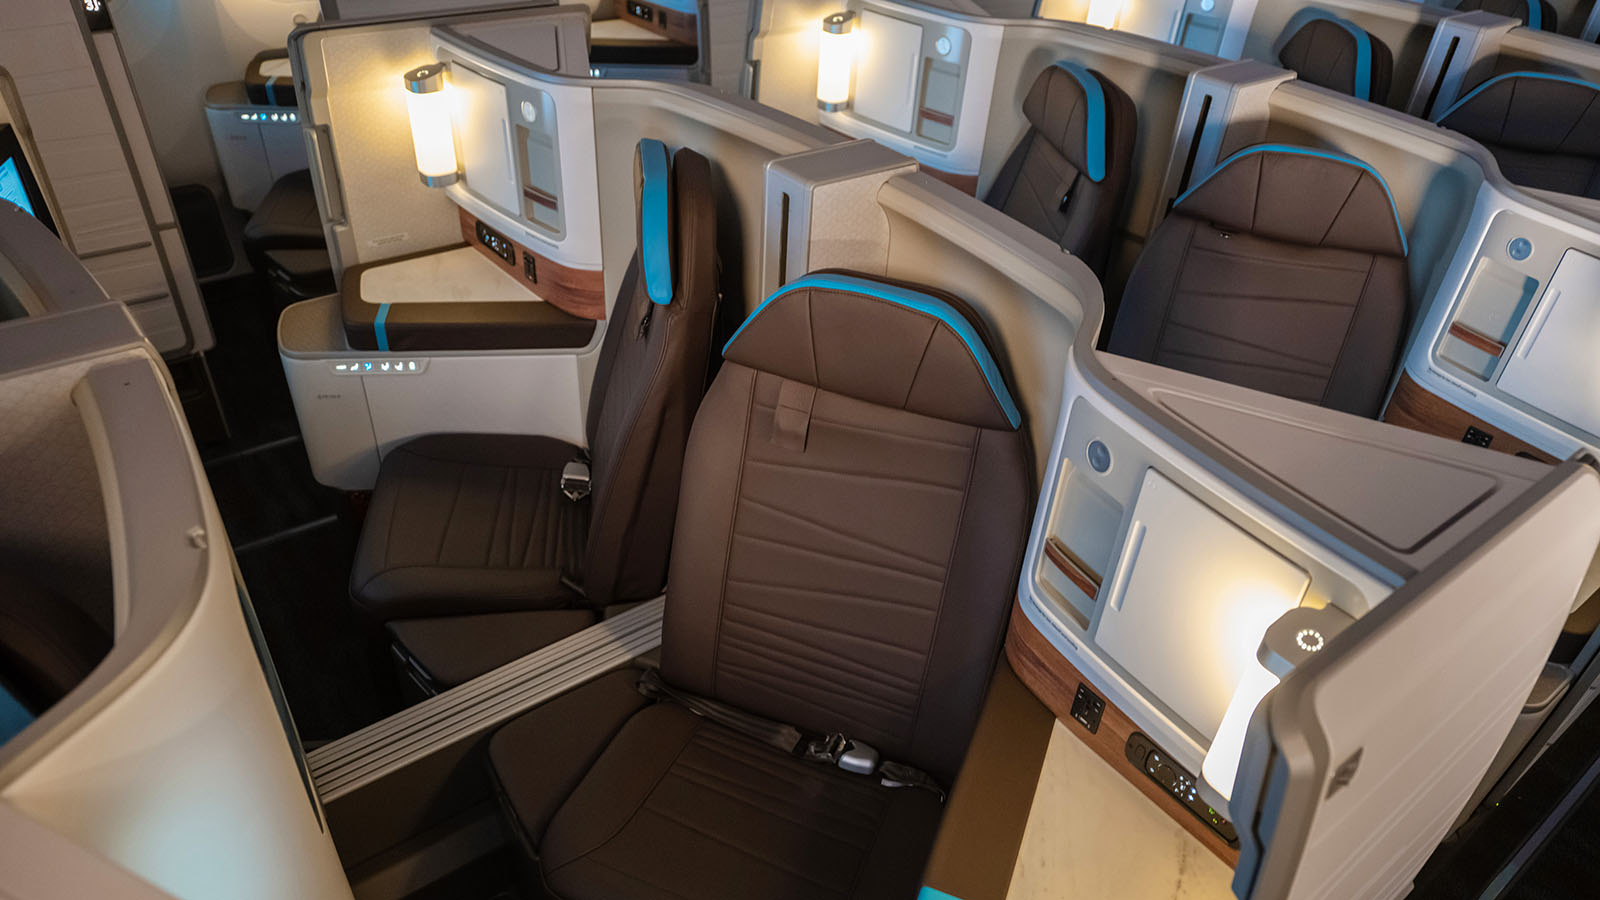 Business Class seating on the Dreamliner with Hawaiian Airlines